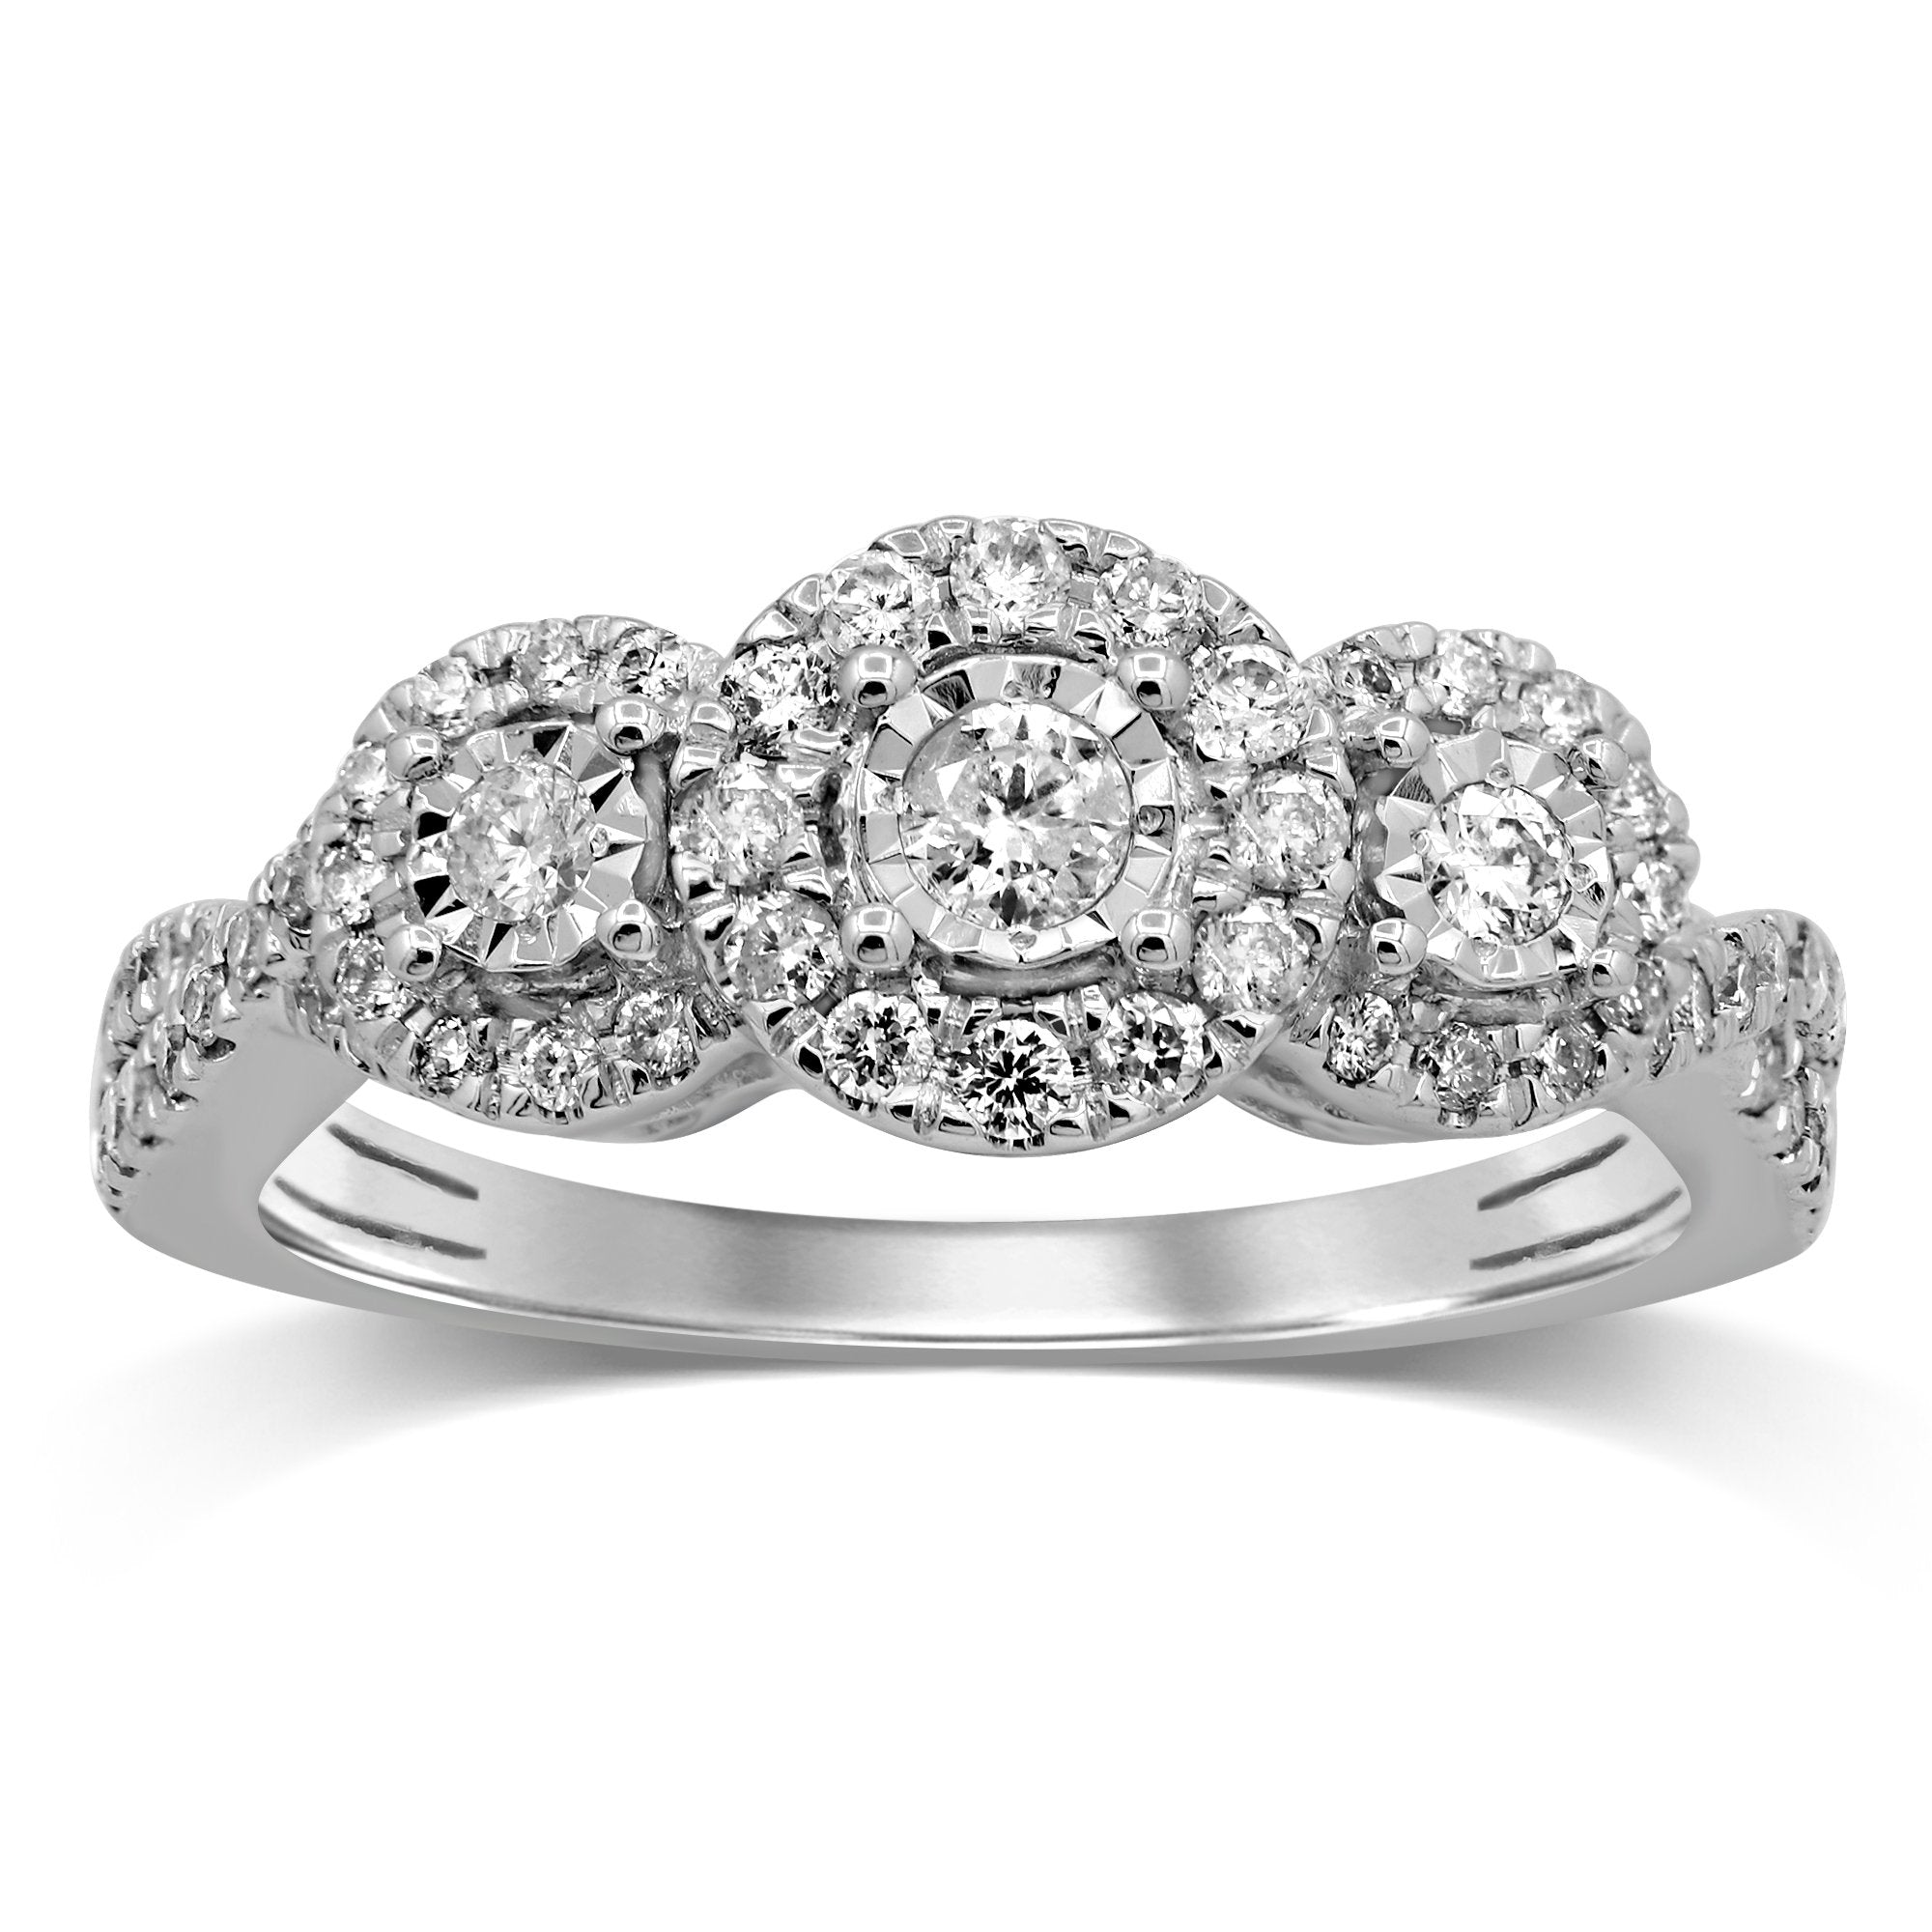 Brilliant Miracle Halo Ring with 1/2ct of Diamonds in 9ct White Gold Rings Bevilles 